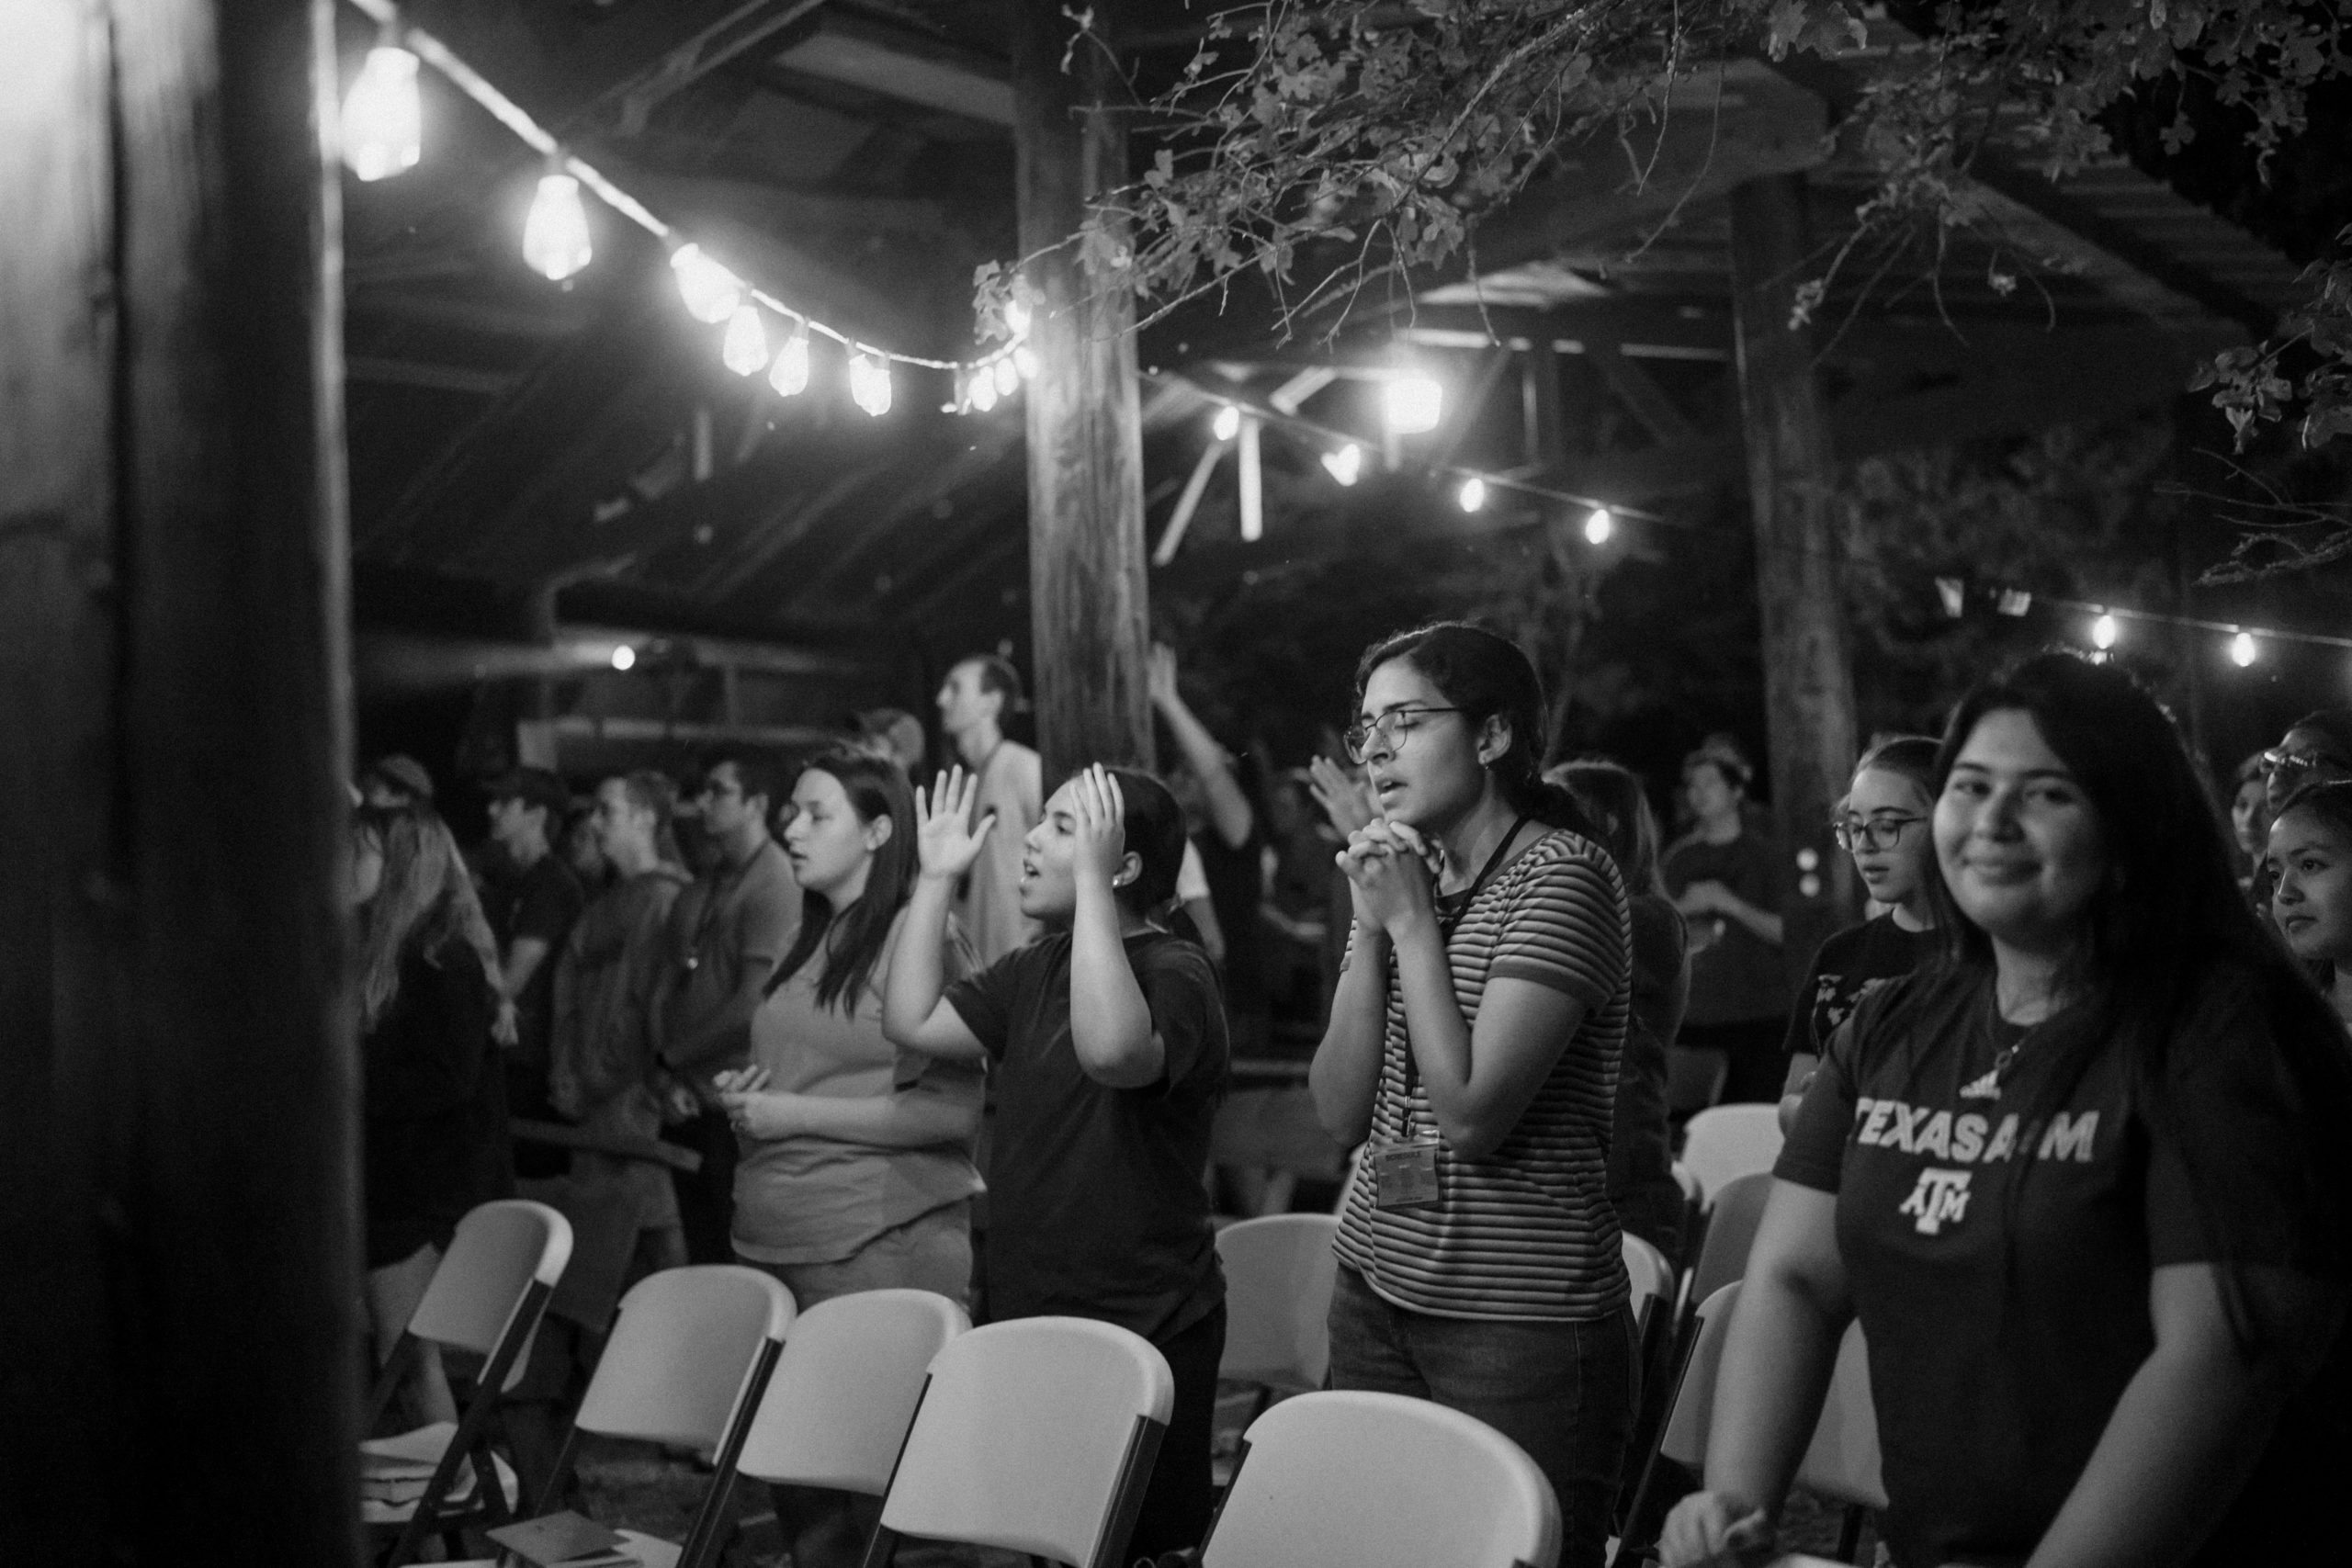 This Chi Alpha retreat captured by Angelina Loreta Photography showcases the richness of meeting with Jesus surrounded by fellowship. Each warm image is a testimony to what God did in and through countless students. DV, Angelina.